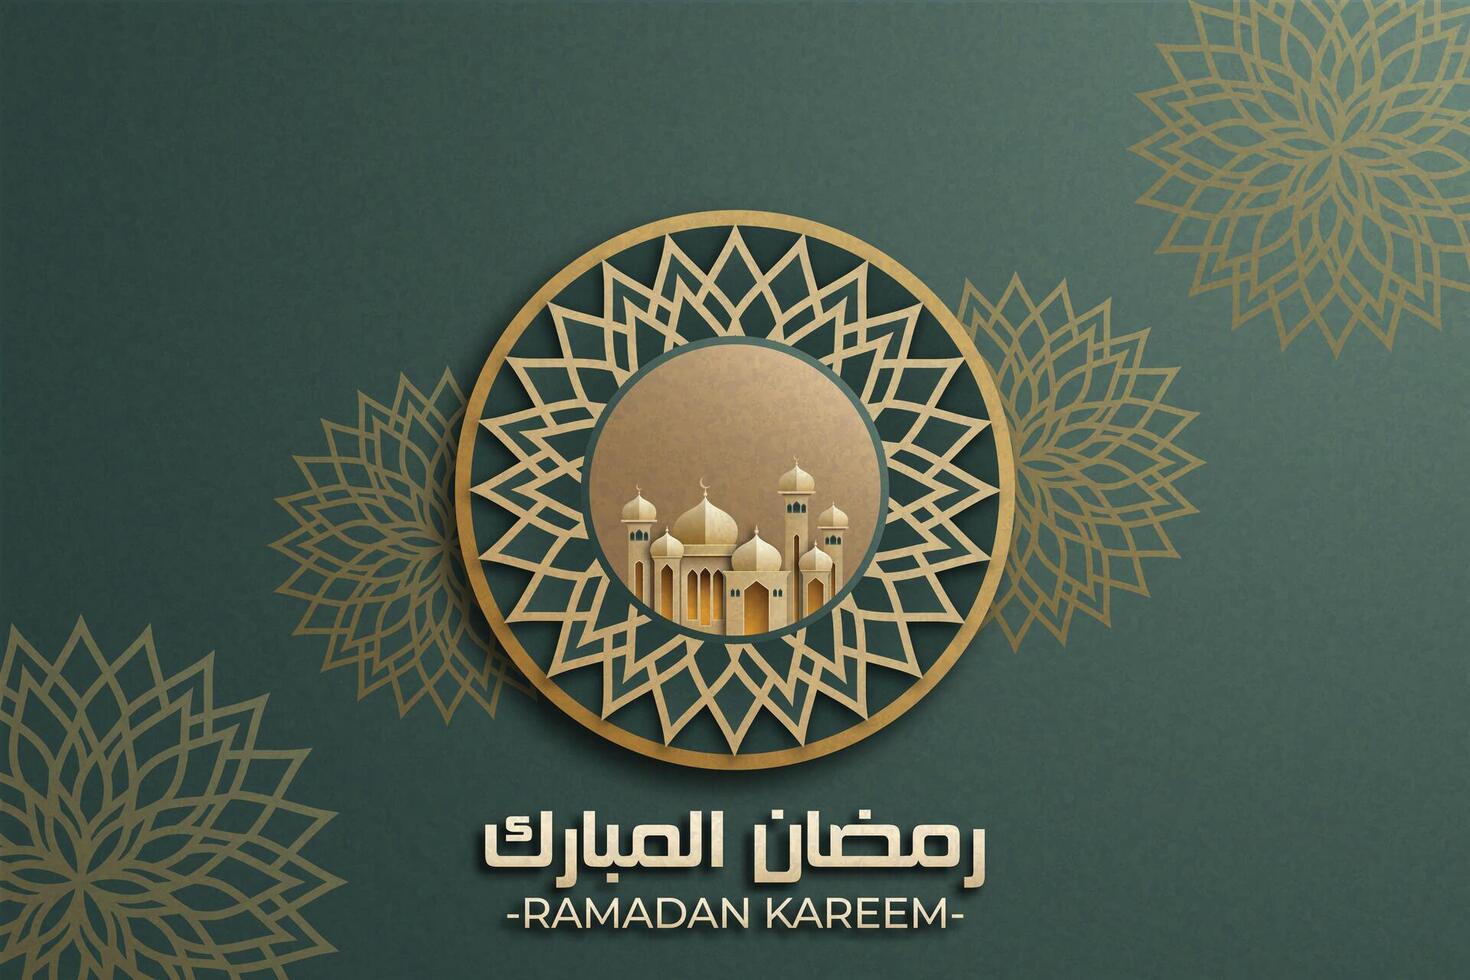 Ramadan Mubarak poster with a 3D paper-cut design featuring Islamic lanterns, mosque, mandala, and a crescent moon. Luxurious green color to create an elegant and festive atmosphere. vector